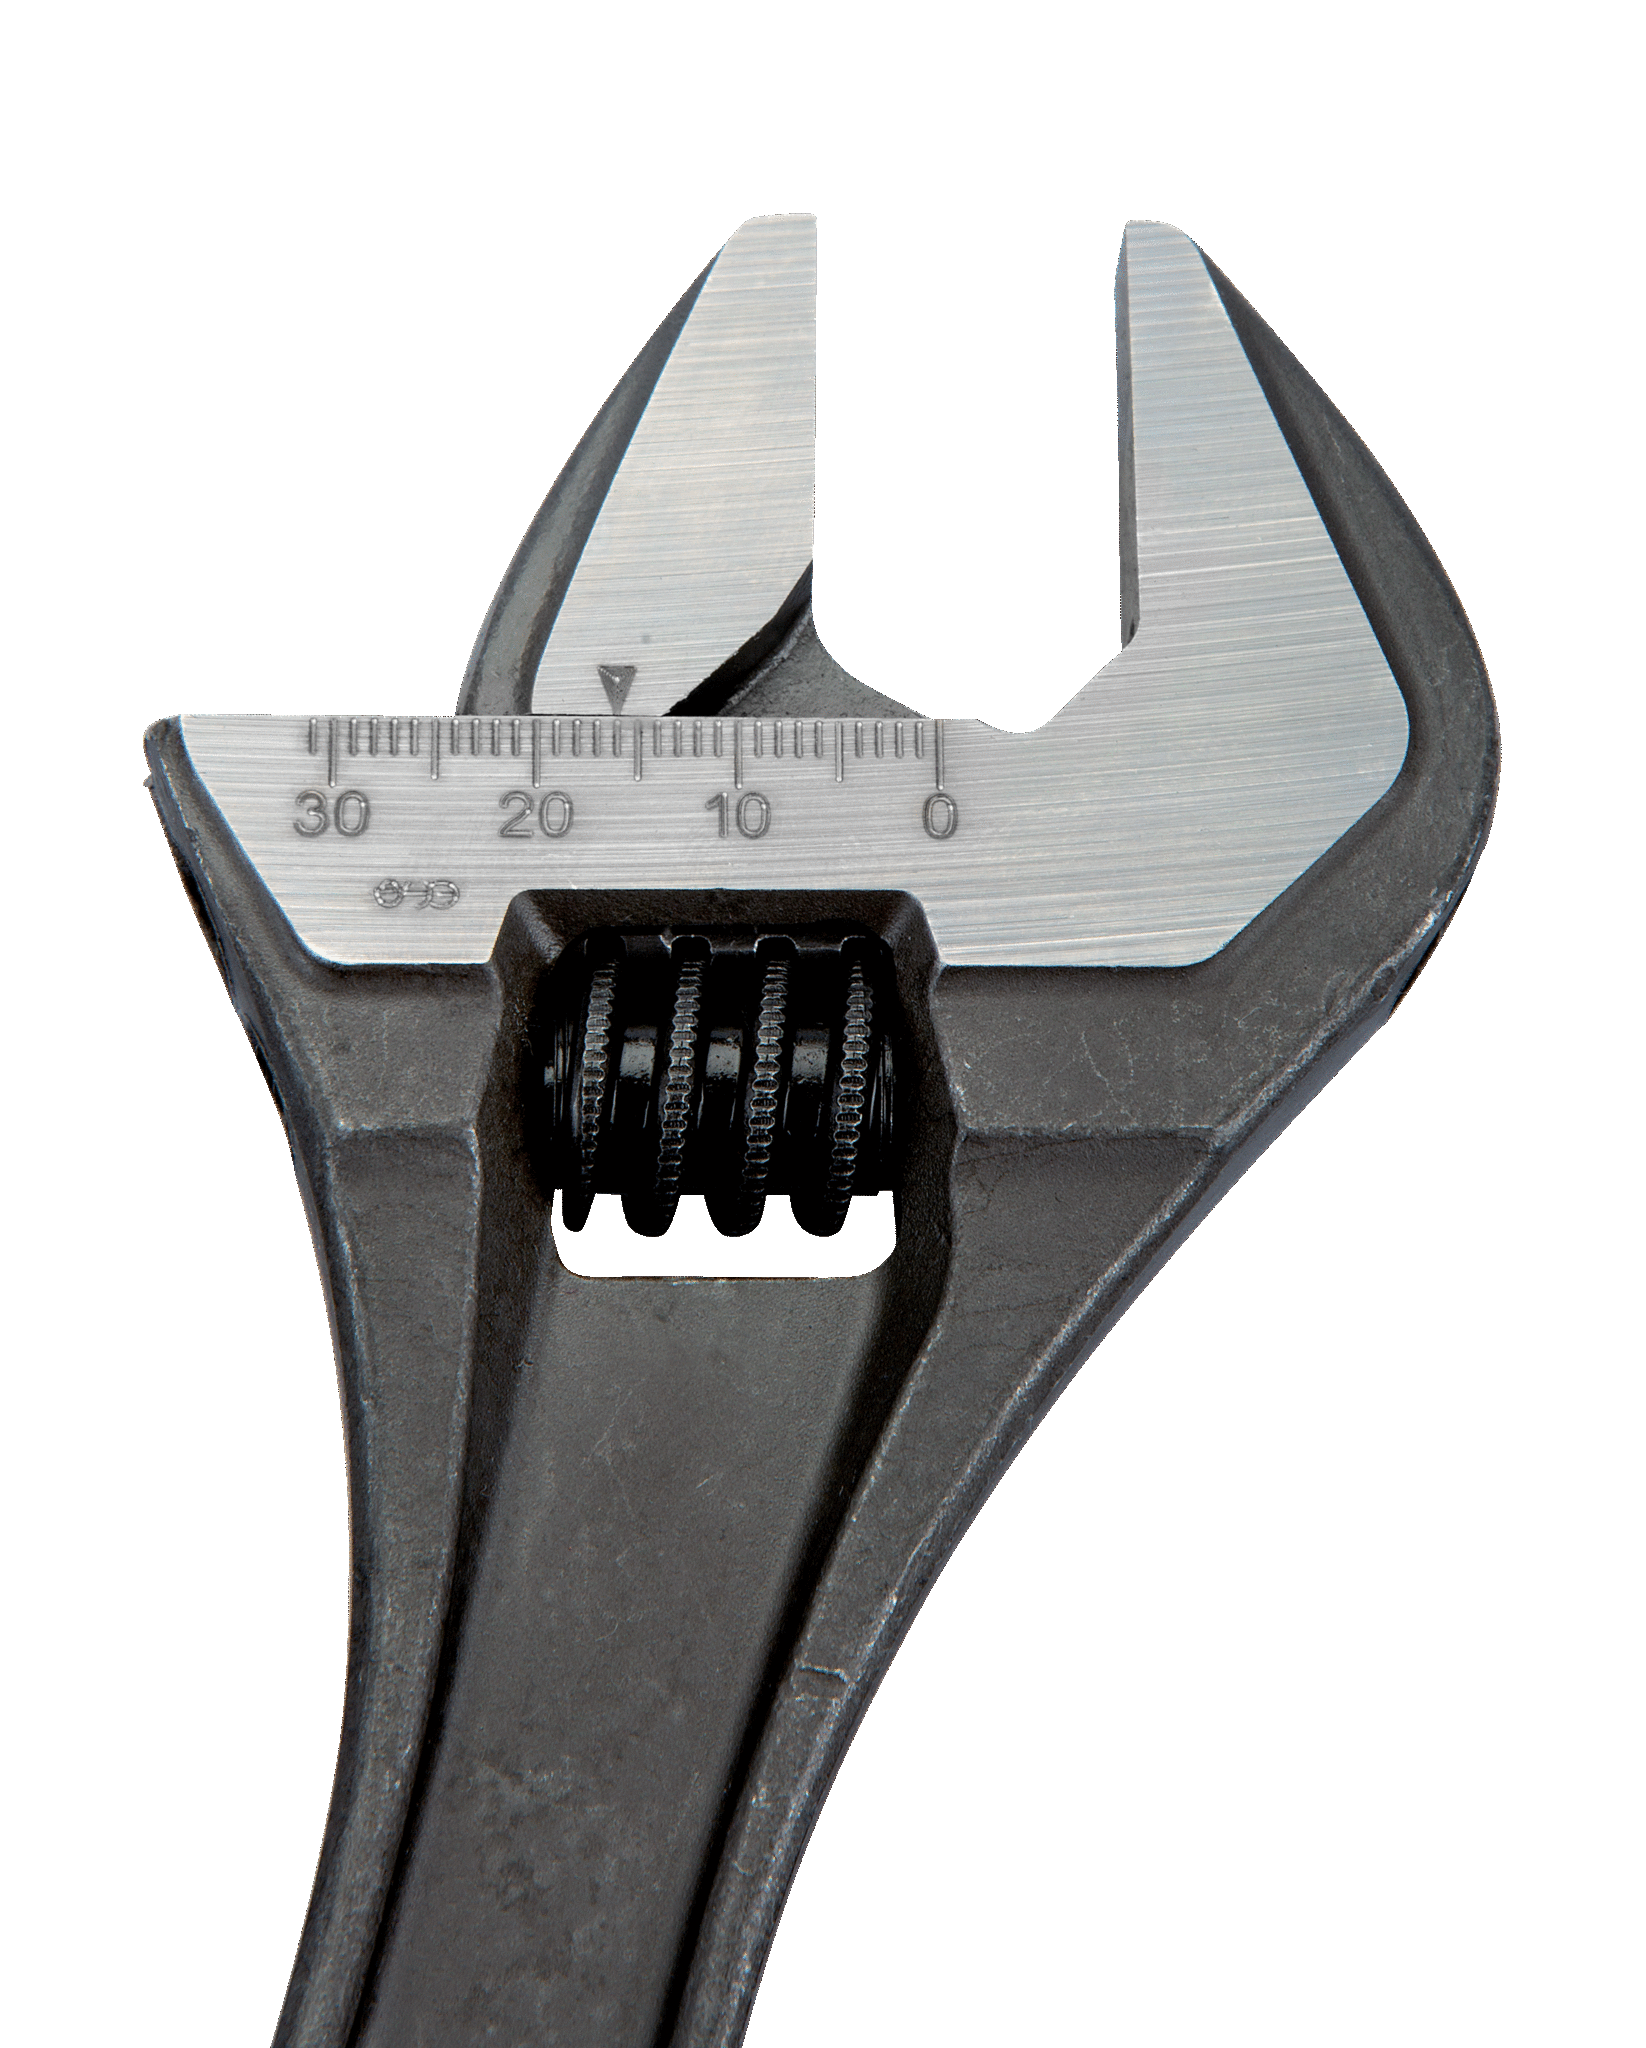 Central Nut Adjustable Wrenches with Phosphate Finish - 8069 by Bahco